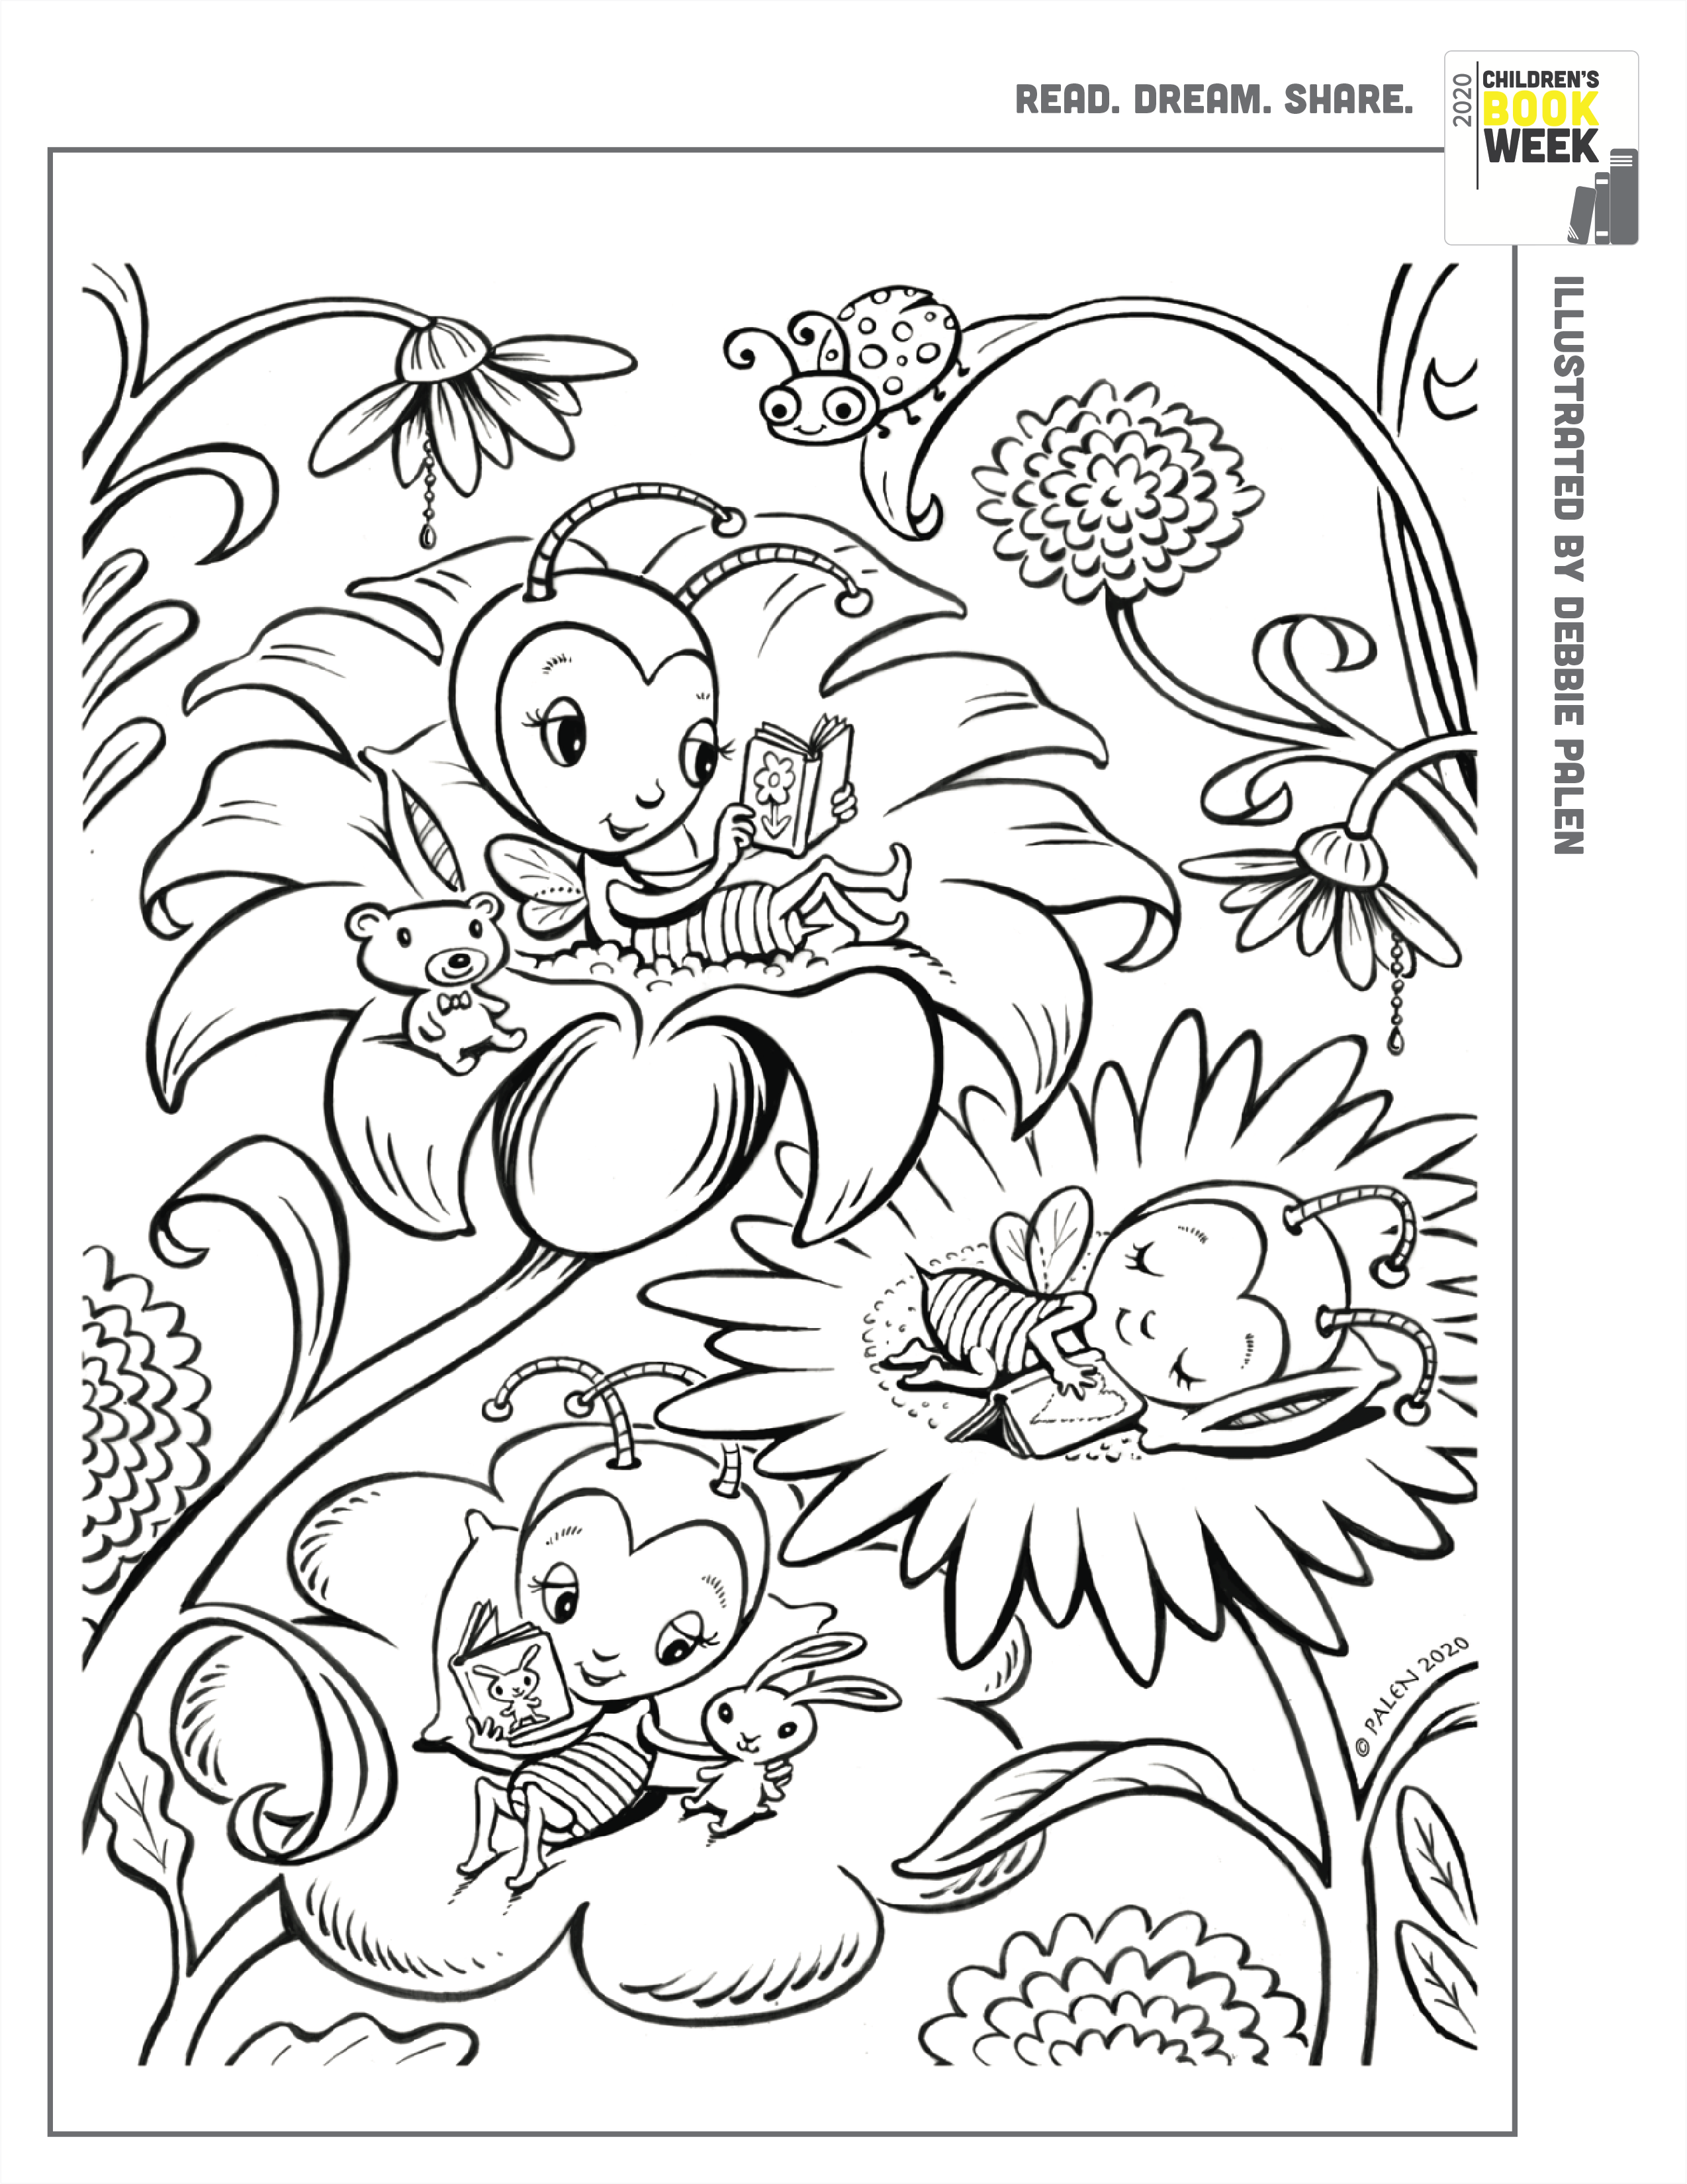 coloring pages from Every Child a Reader